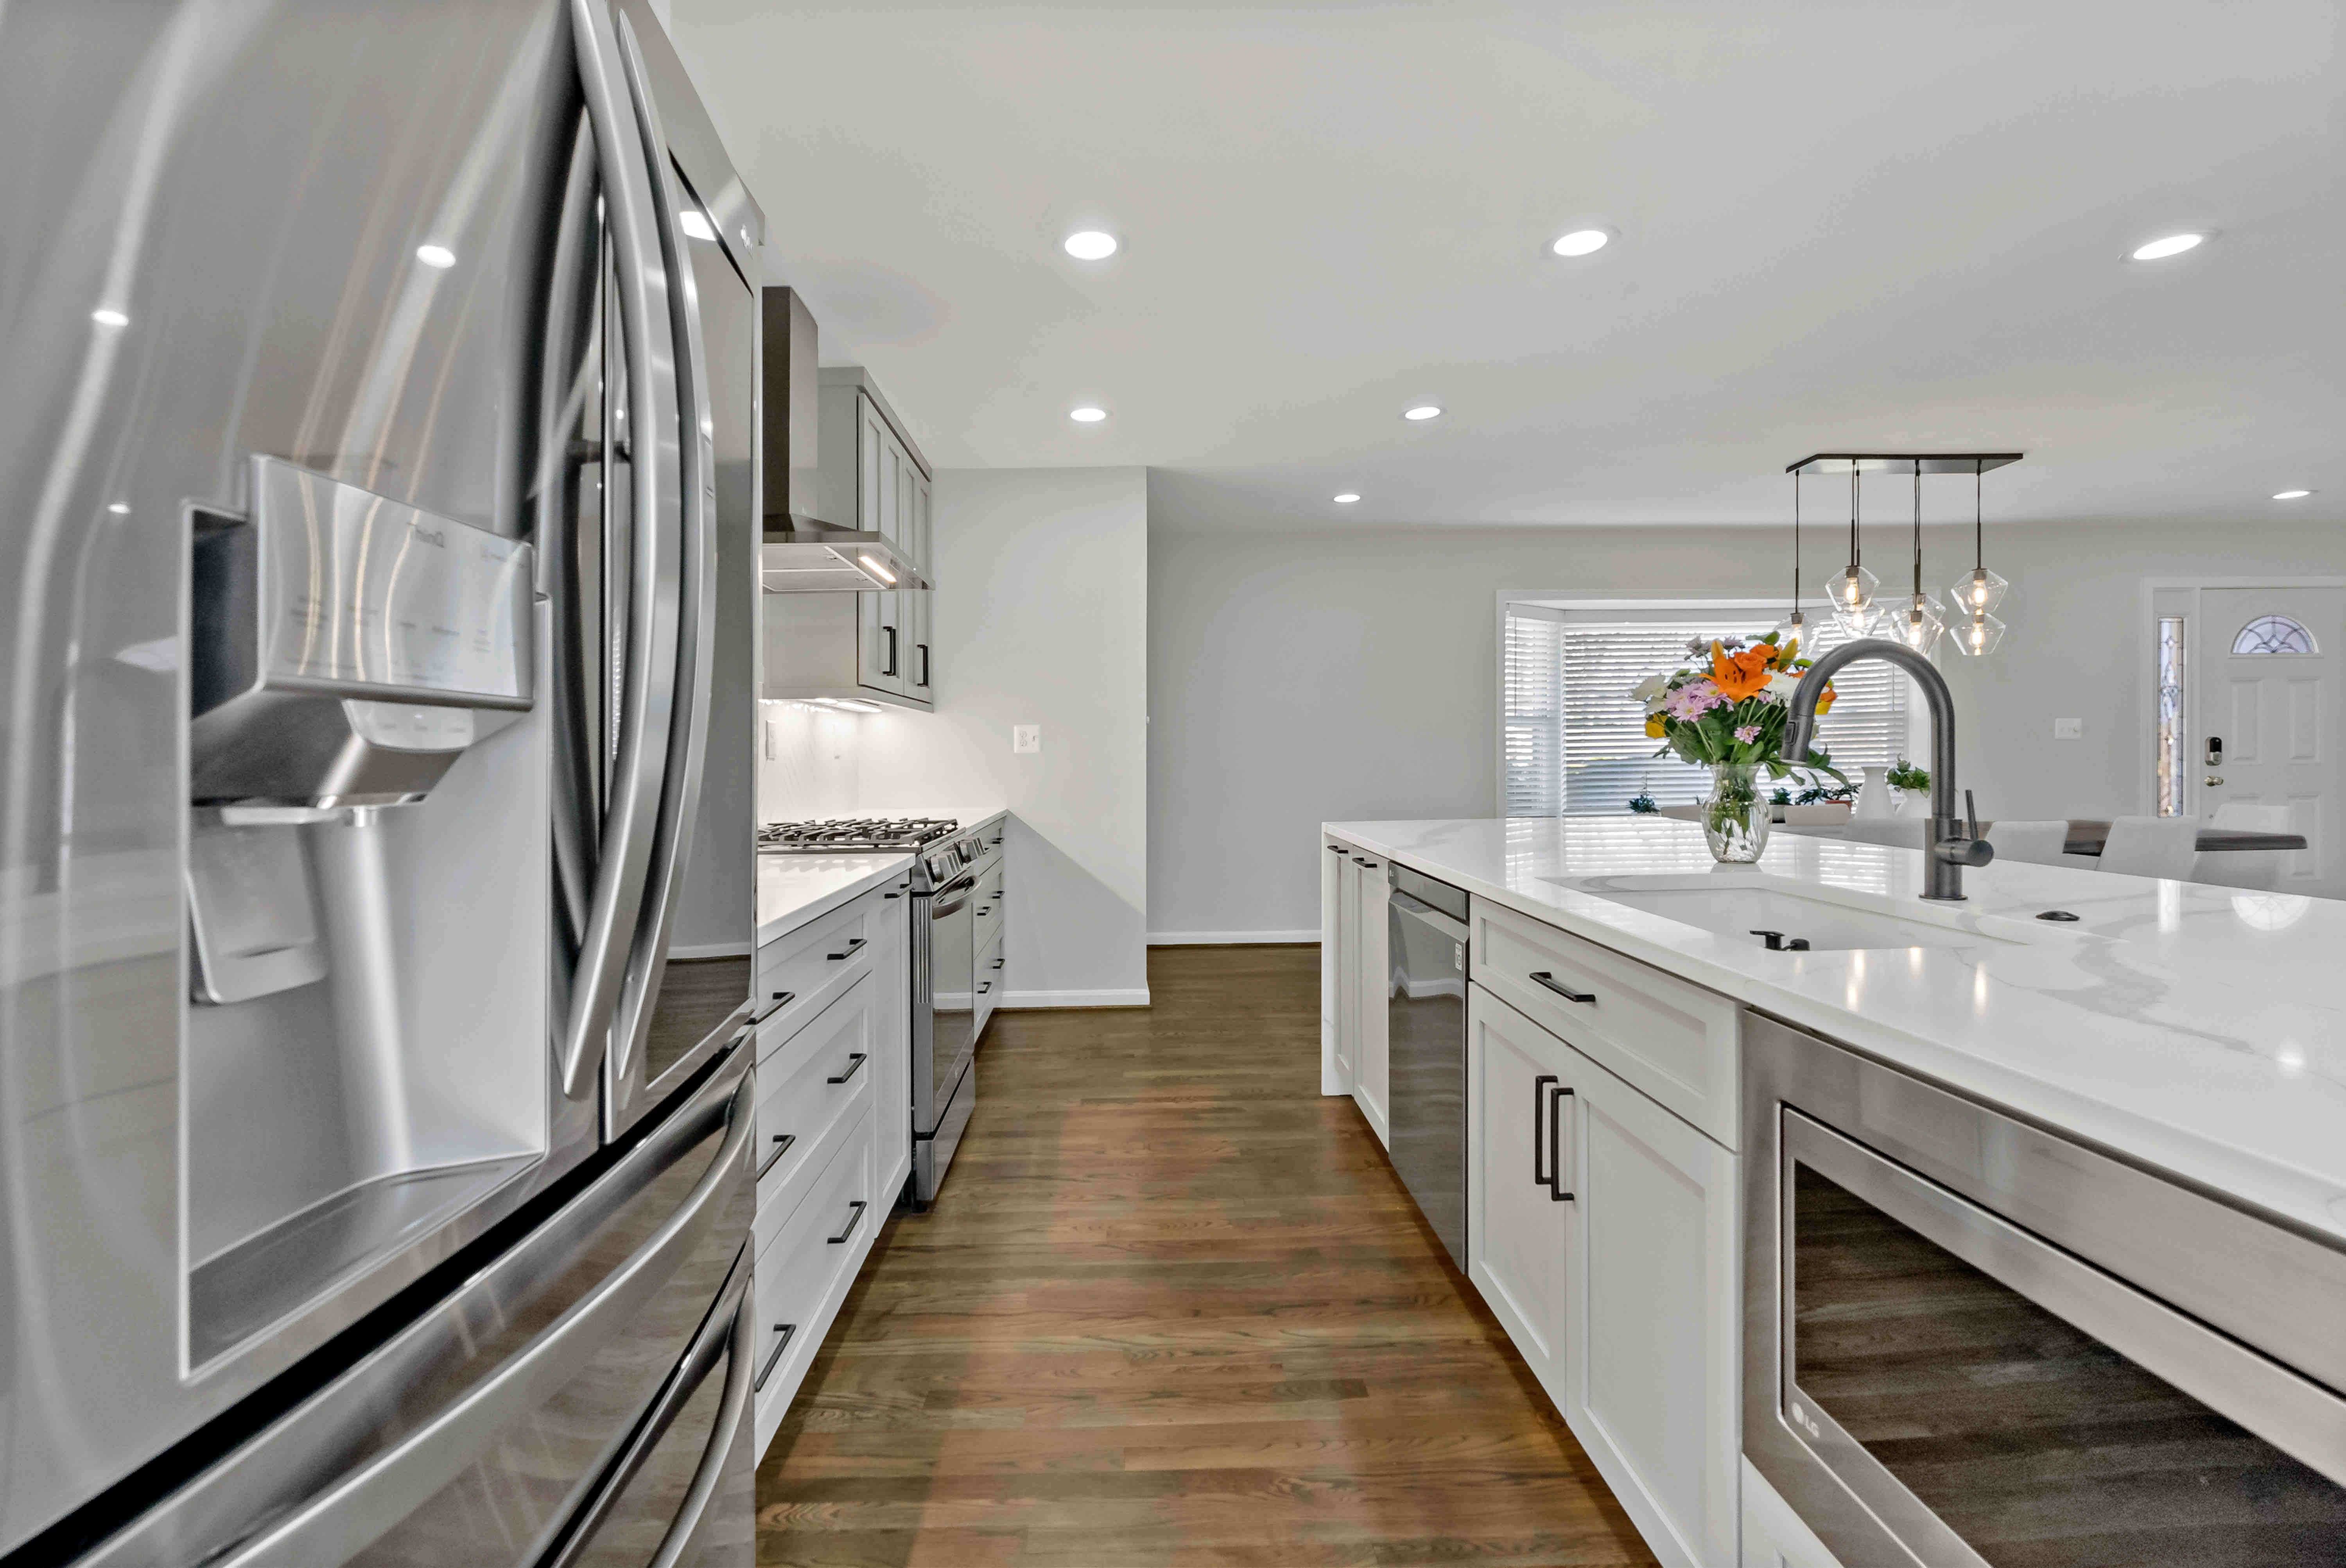 White kitchen with silver appliances and fixtures